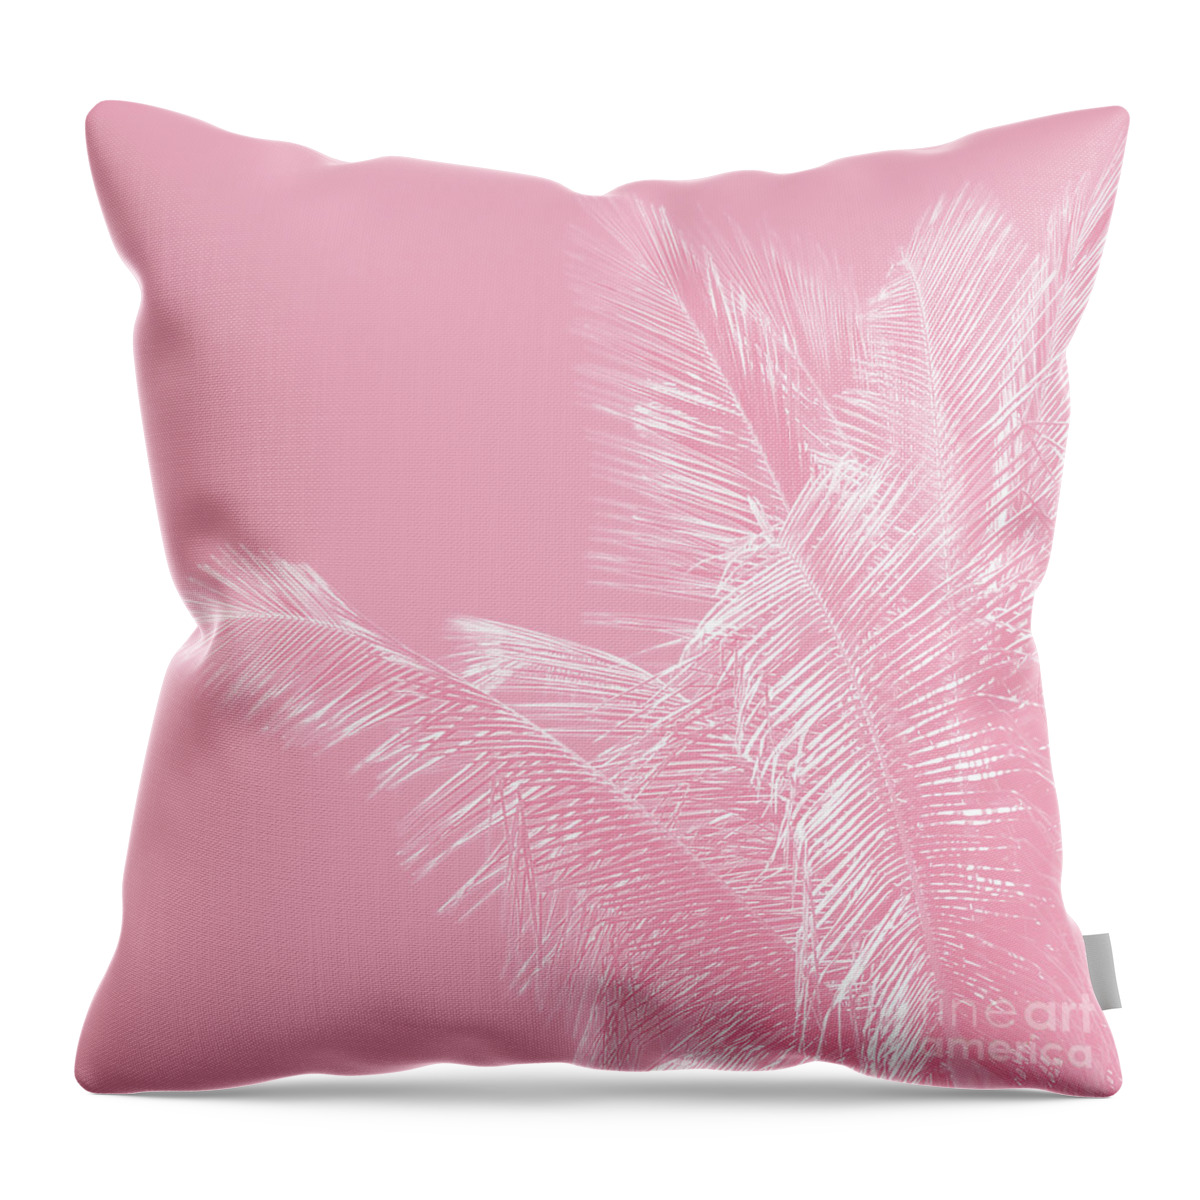 Millennial Pink Throw Pillow featuring the photograph Millennial Pink illumination of Heart White Tropical Palm Hawaii by Sharon Mau